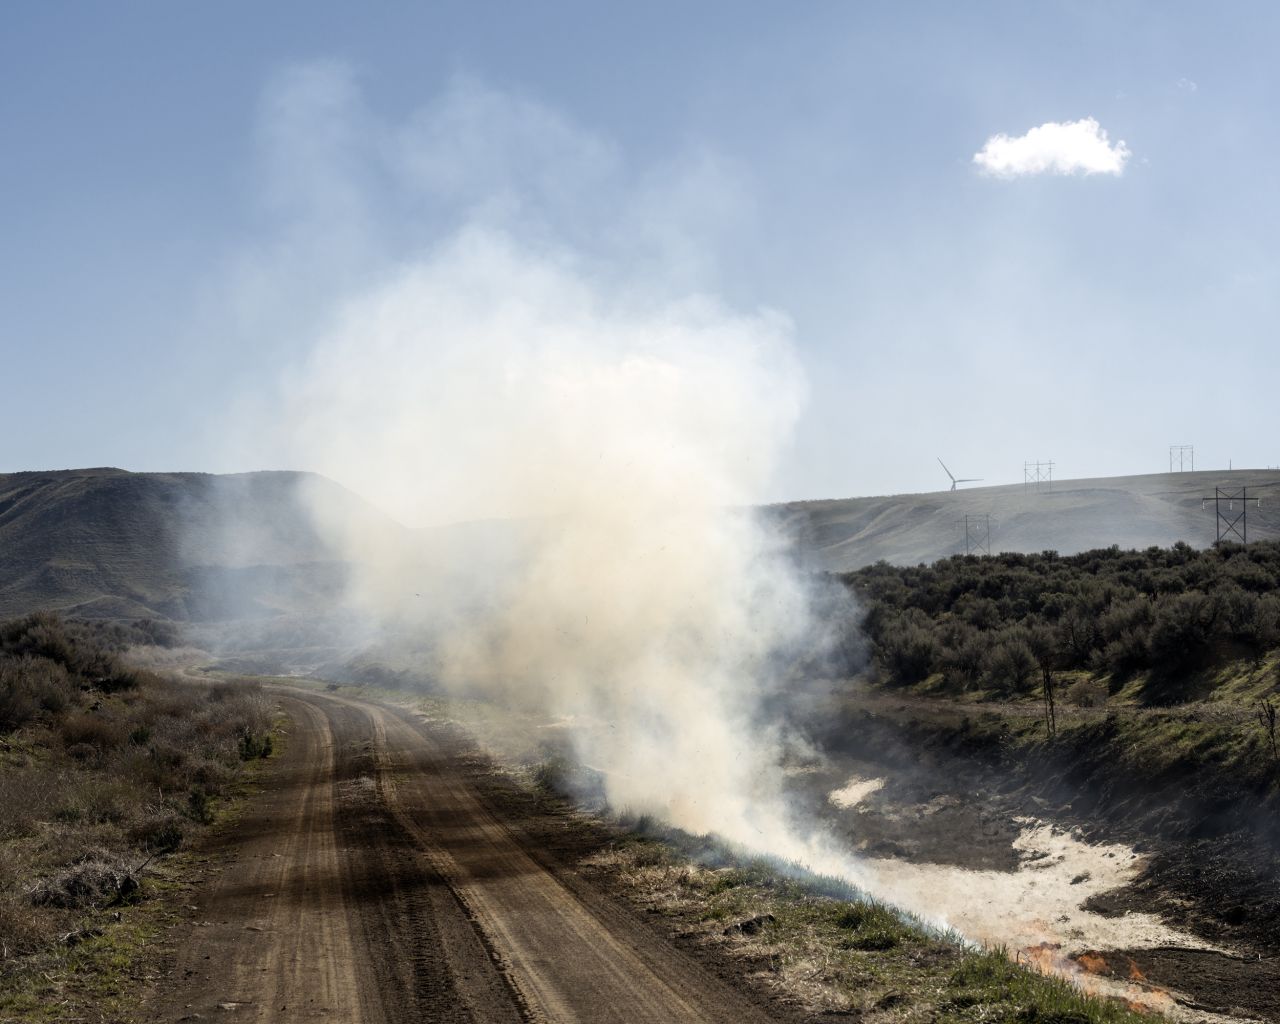 In the desert just south of Bliss, Horvath spotted local workers by the side of a road burning brush that had accumulated over the winter. "I was drawn to how the act of clearing and regeneration mirrored some of the larger themes in the project," Horvath said.